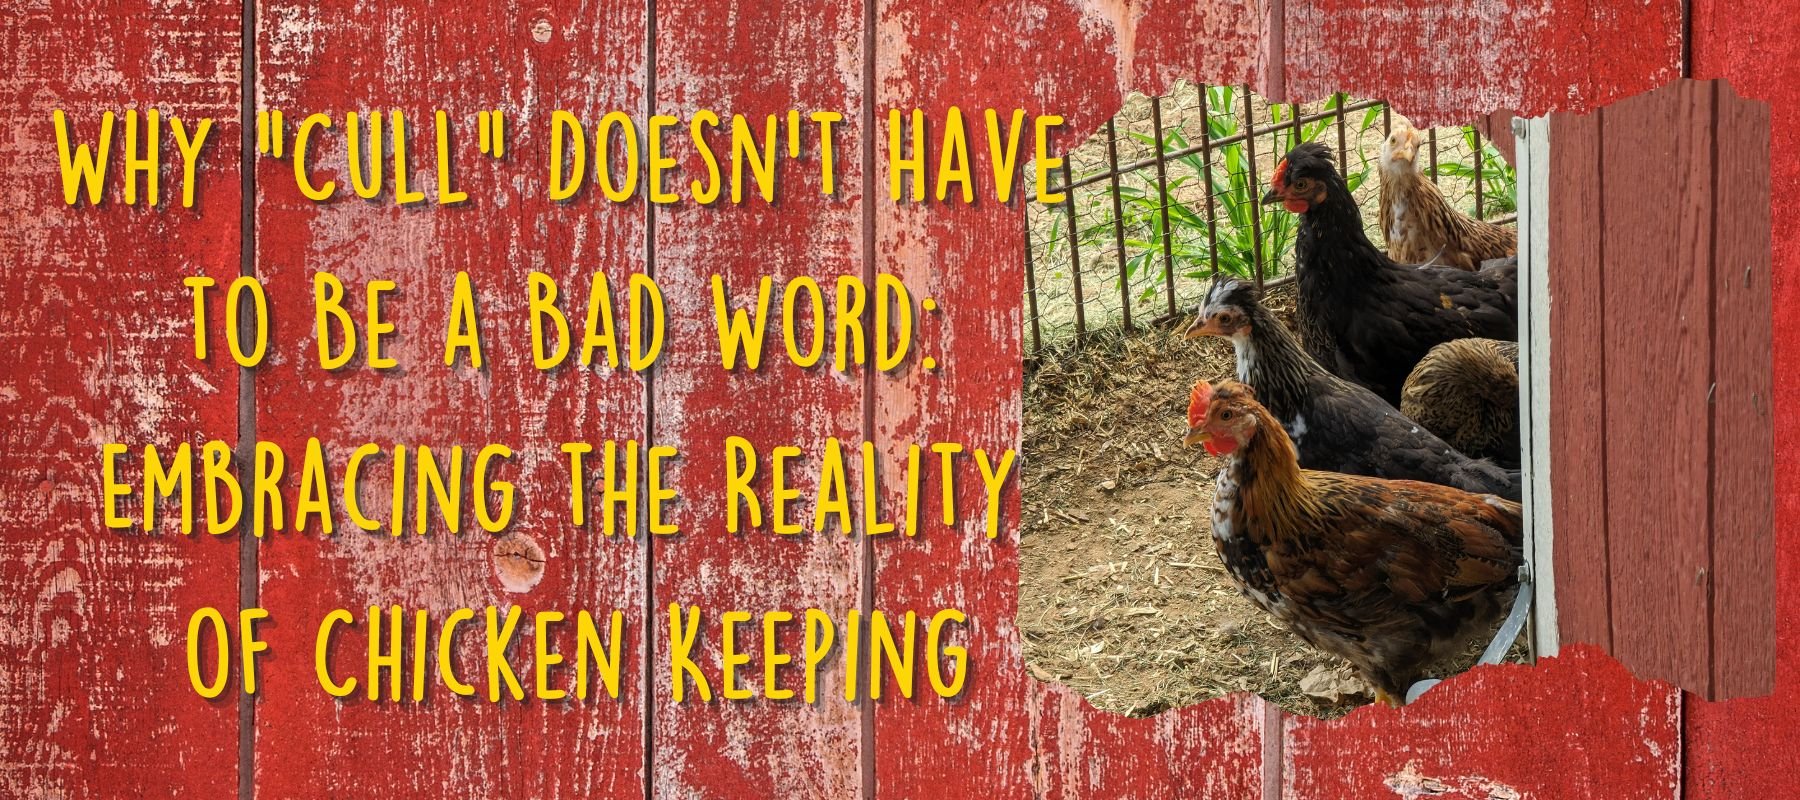 Why Cull Doesn't Have to Be a Bad Word: Embracing the Reality of Chicken Keeping - Cluck It All Farms